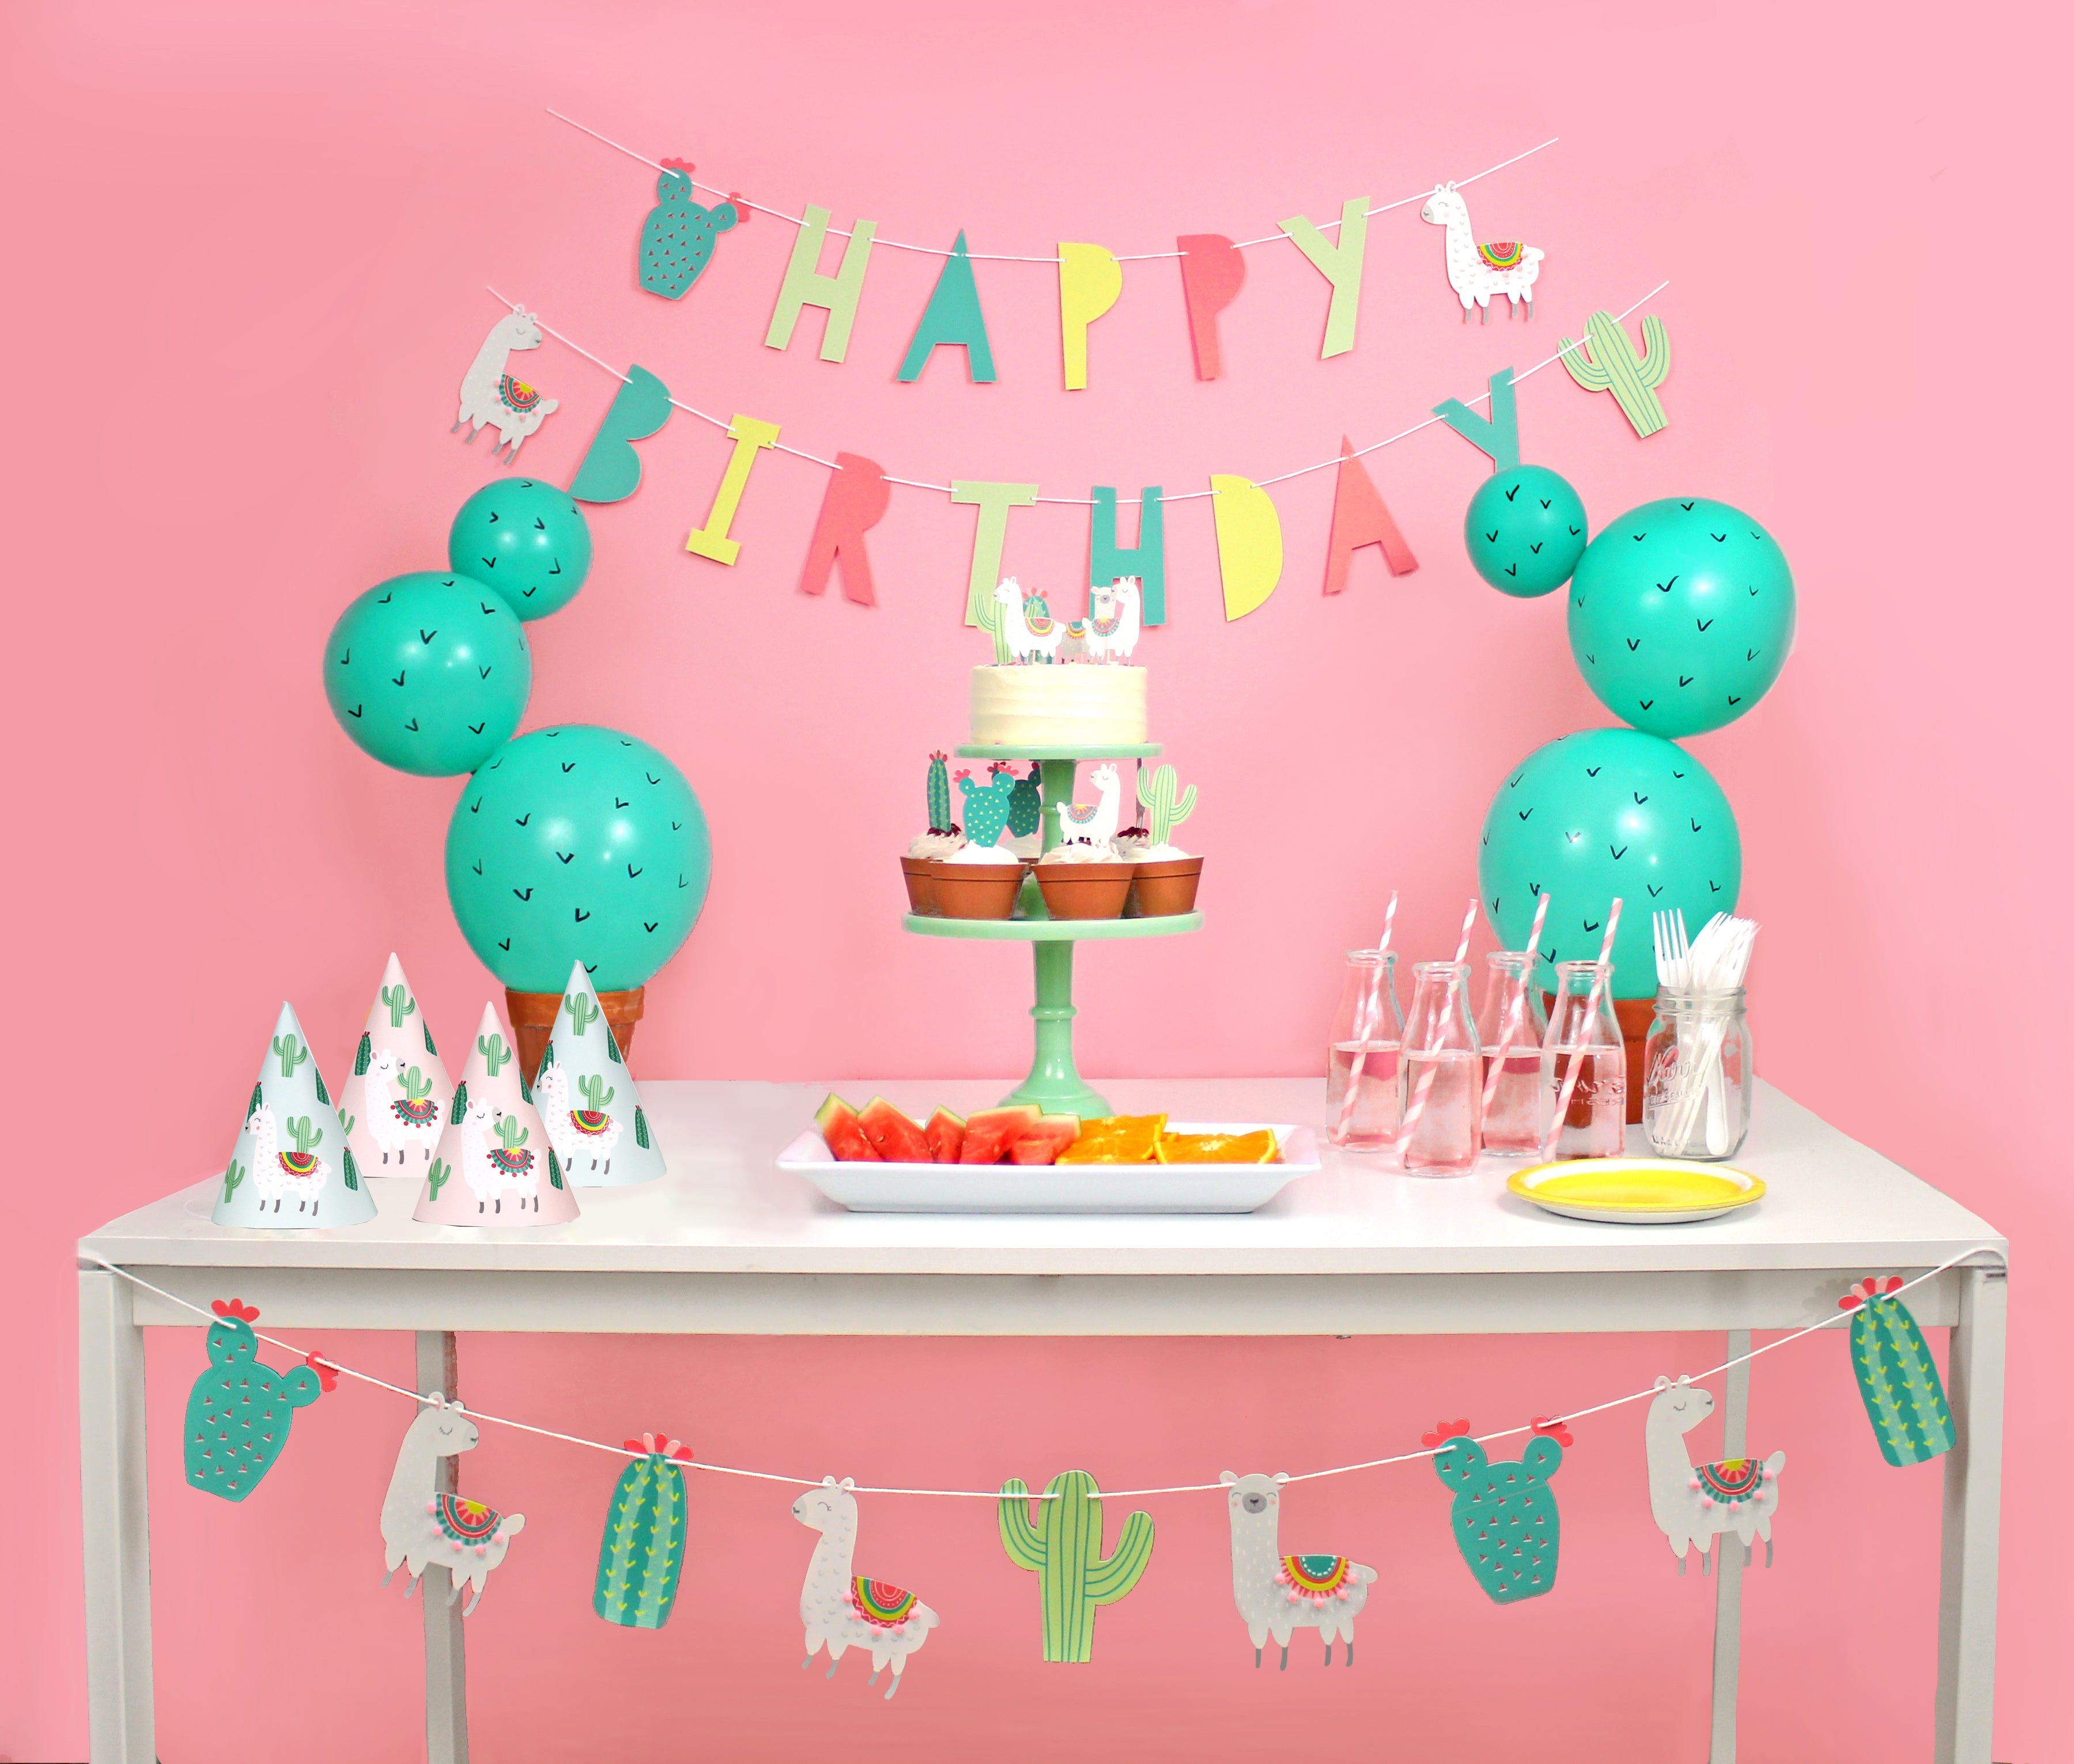 Llama And Cactus Party - Birthday Party Decoration Kit - 12 Guests